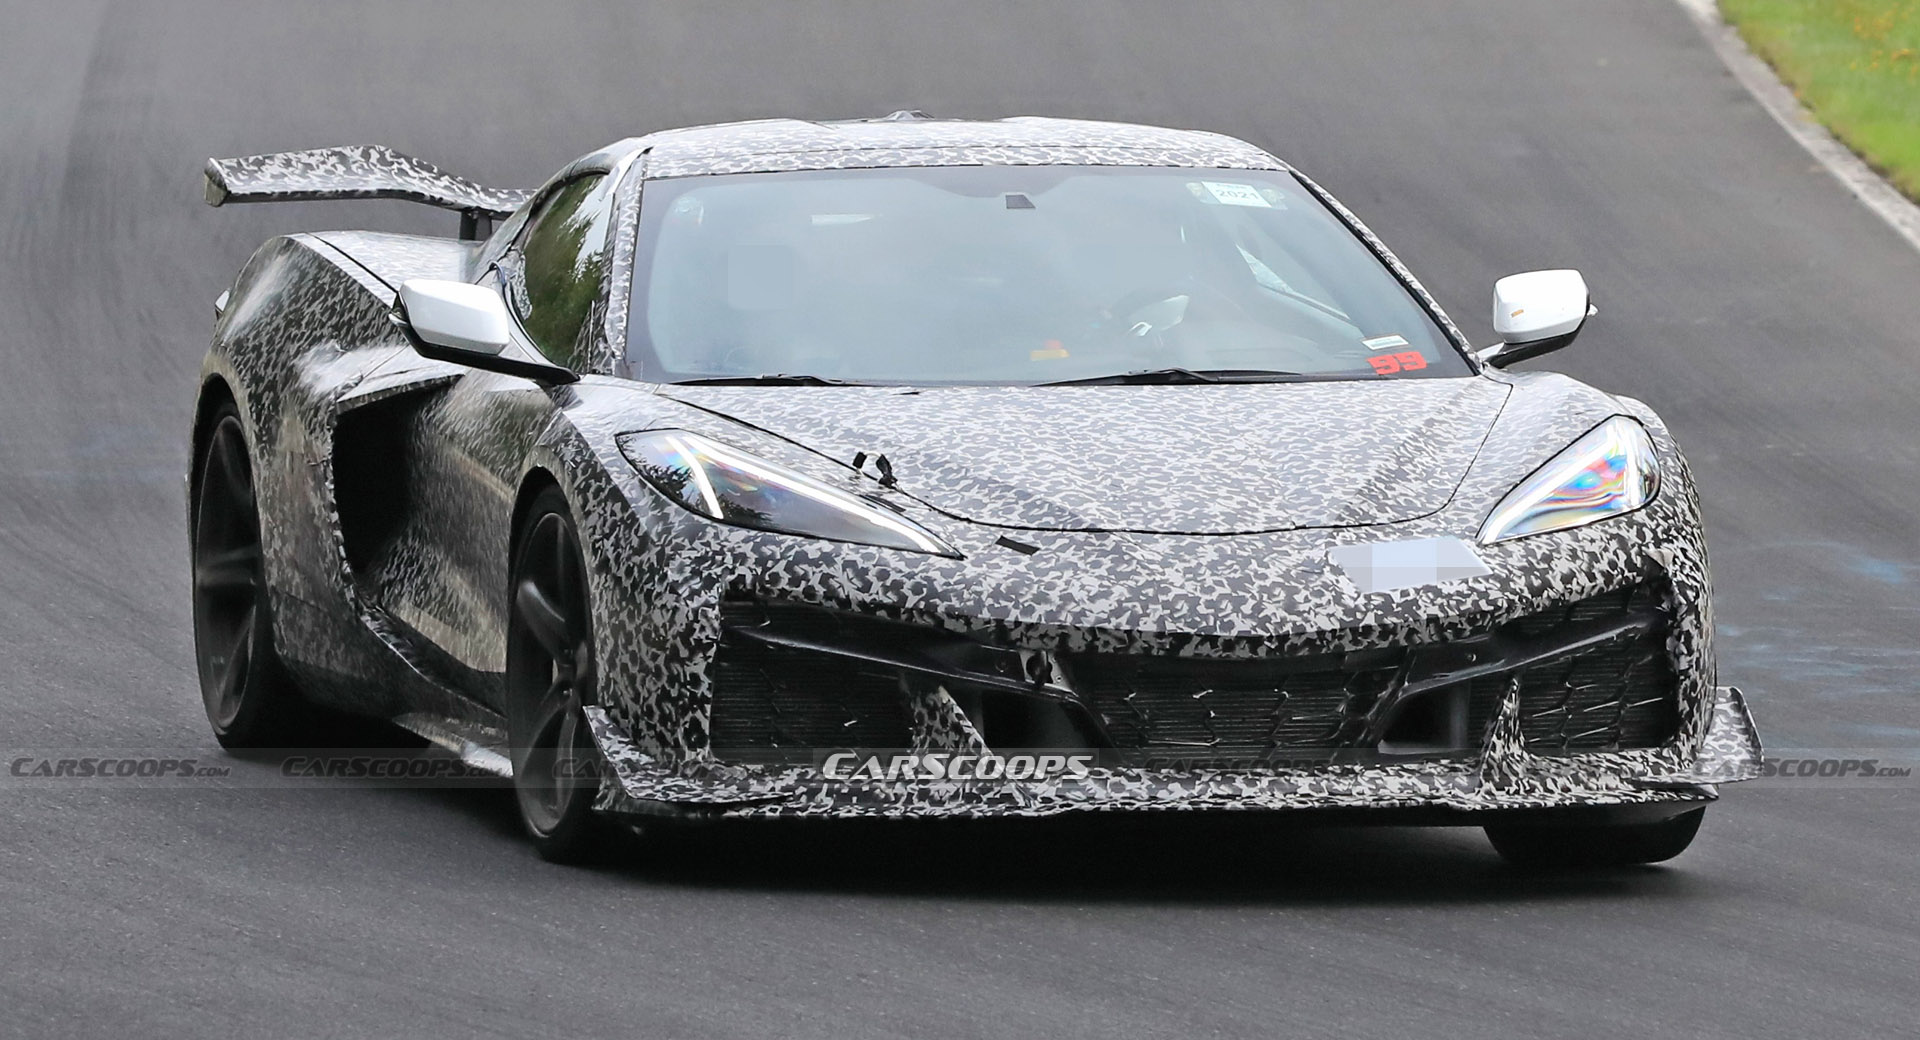 2023 Chevrolet Corvette Z06 Caught Testing At The Nurburgring And It's